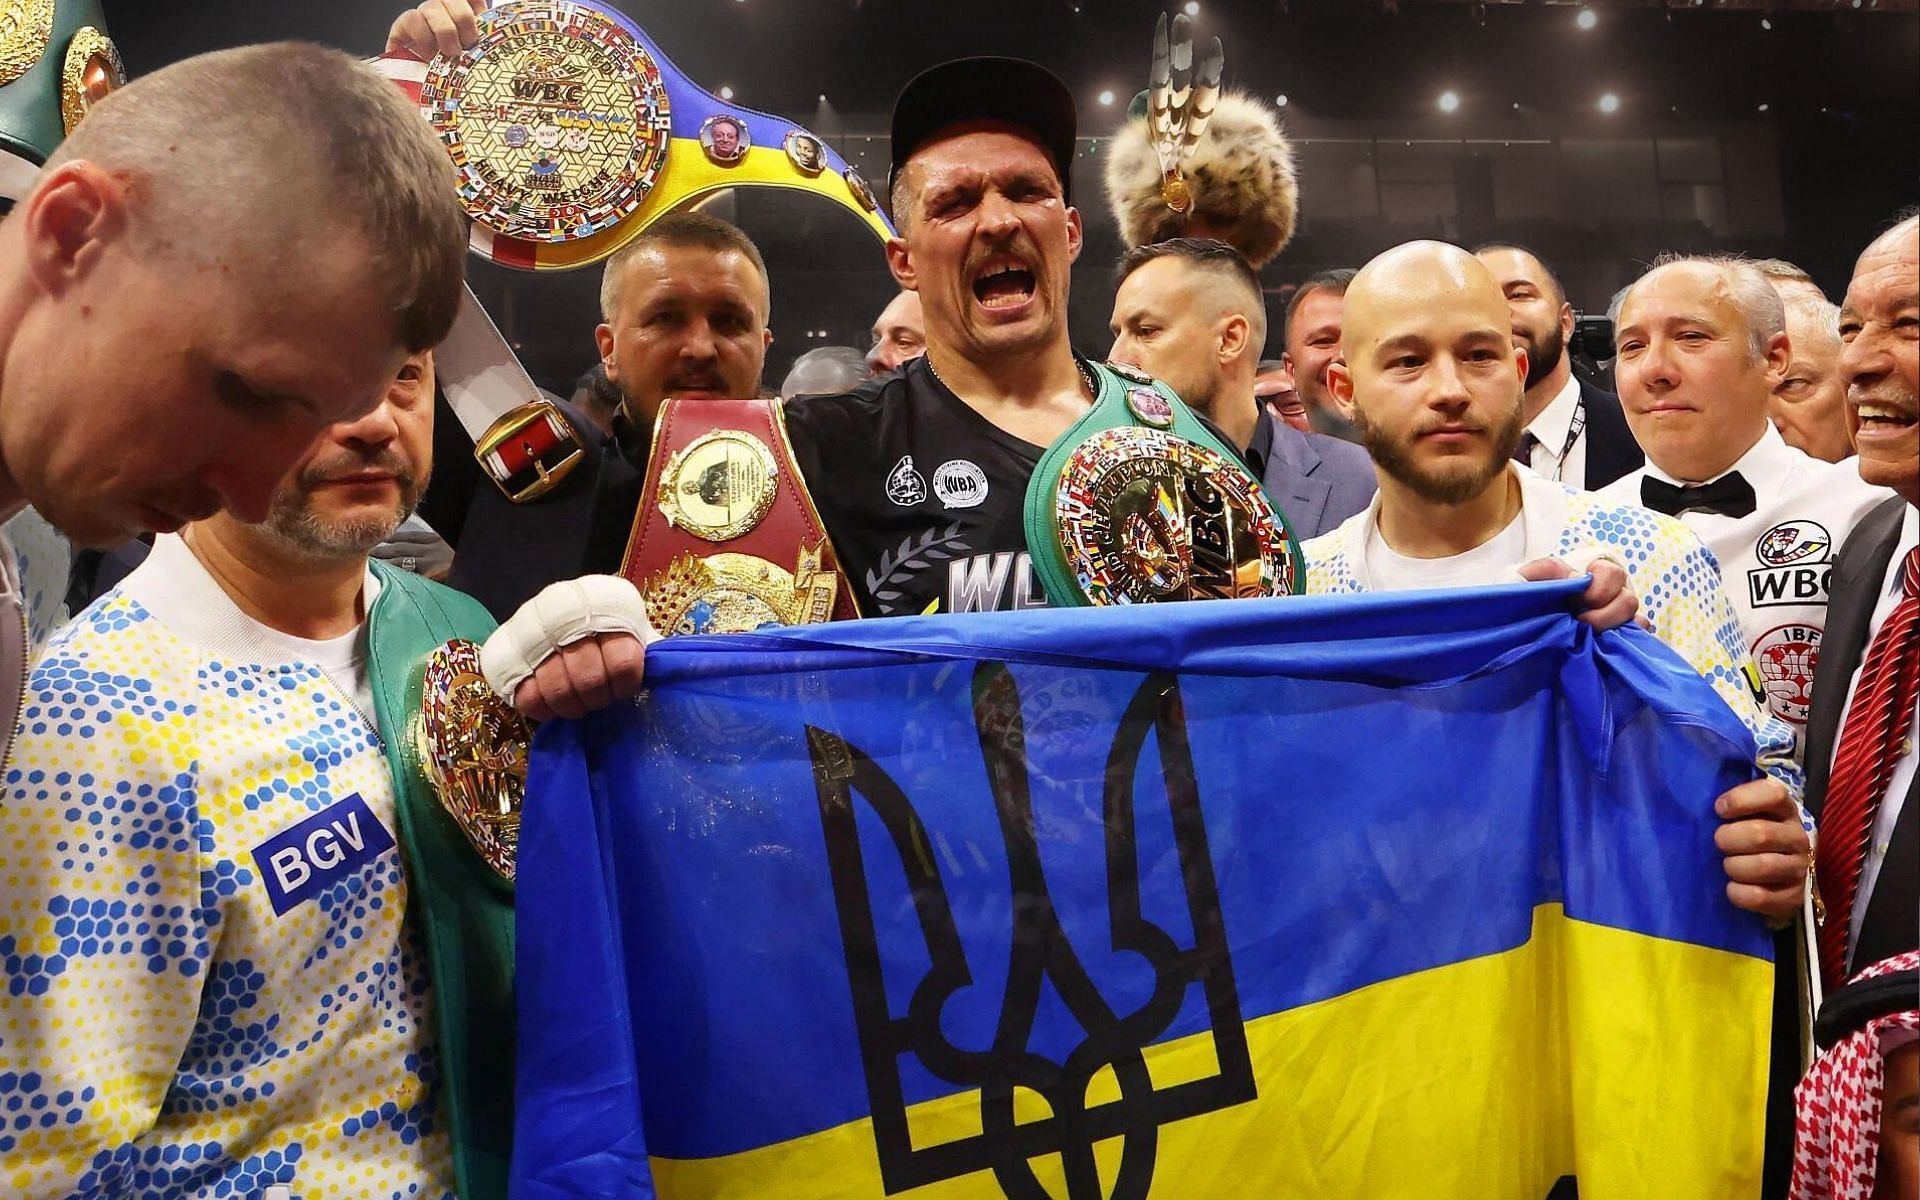 Oleksandr Usyk defeats Tyson Fury by a split decision to become the undisputed heavyweight champion. [Image courtesy: Getty Images]